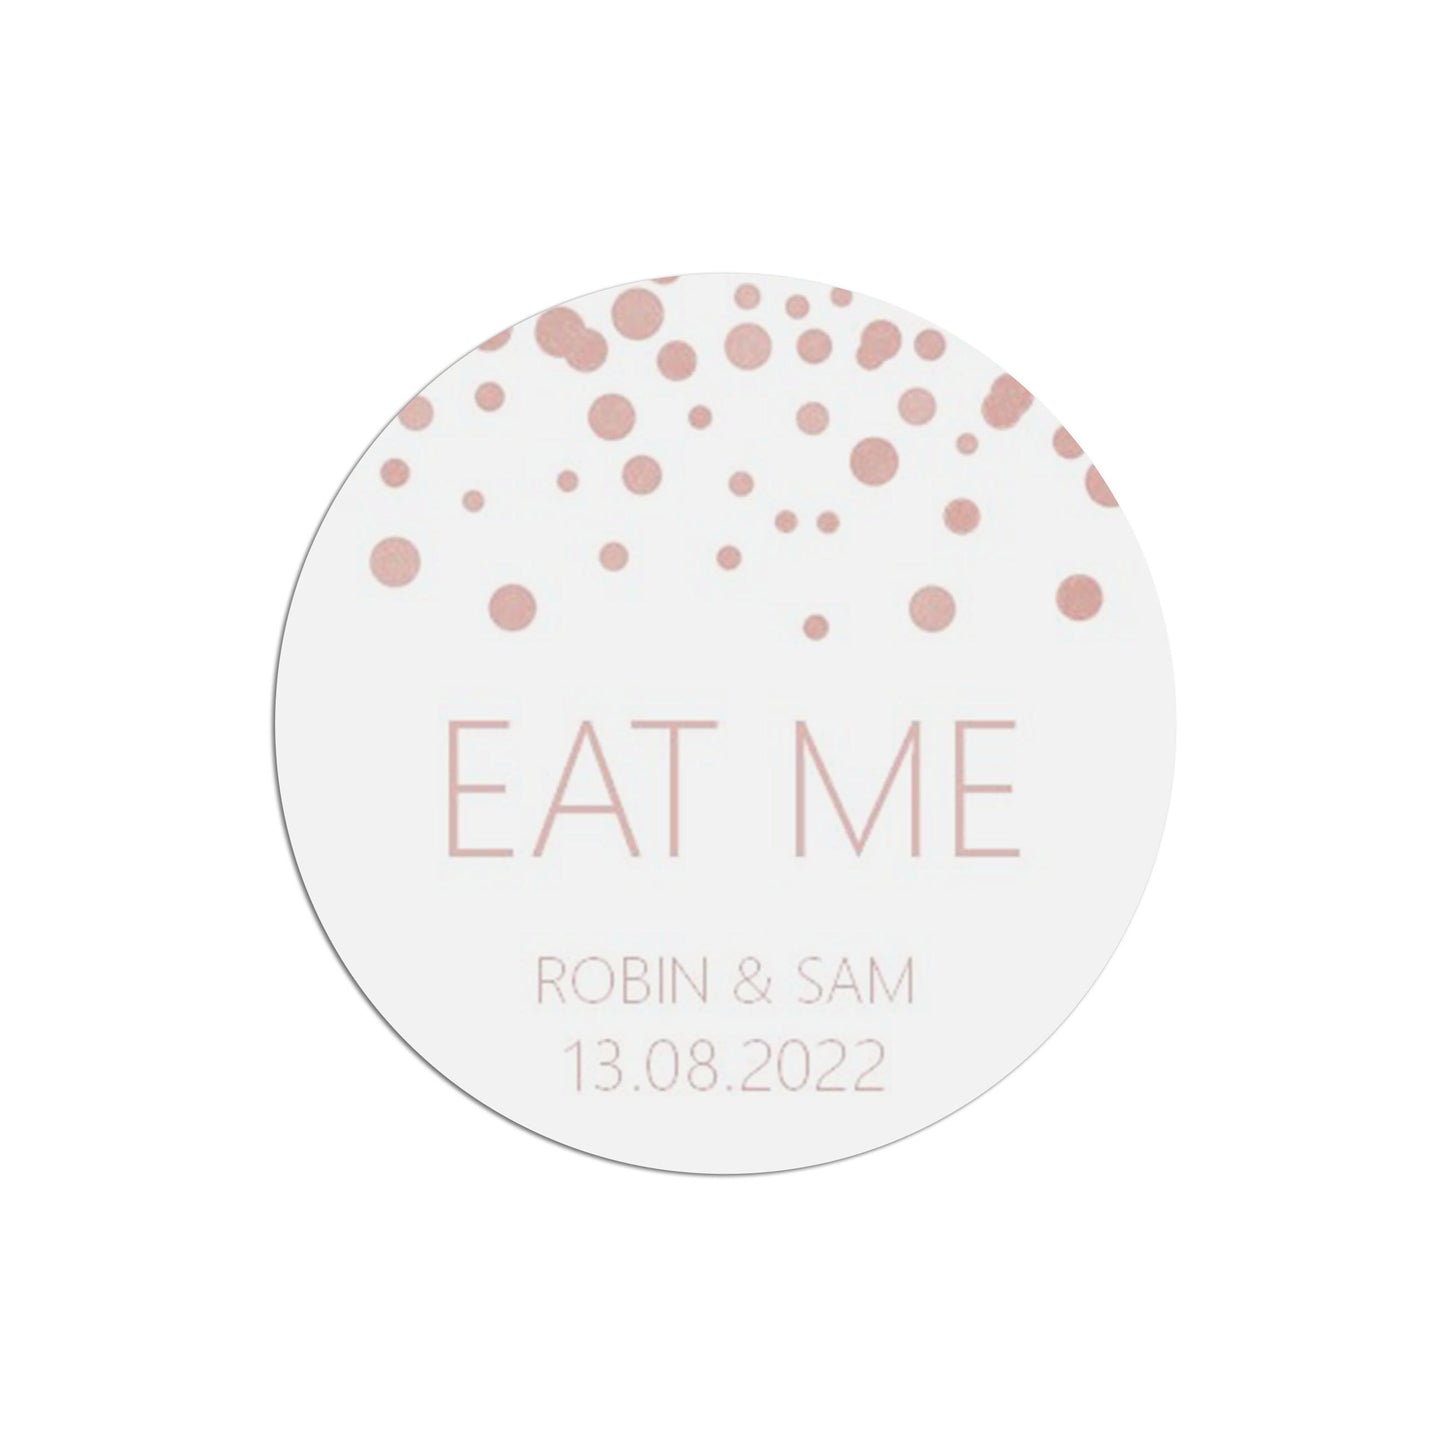 Eat Me Wedding Stickers, Blush Confetti 37mm Round Personalised x 35 Stickers Per Sheet